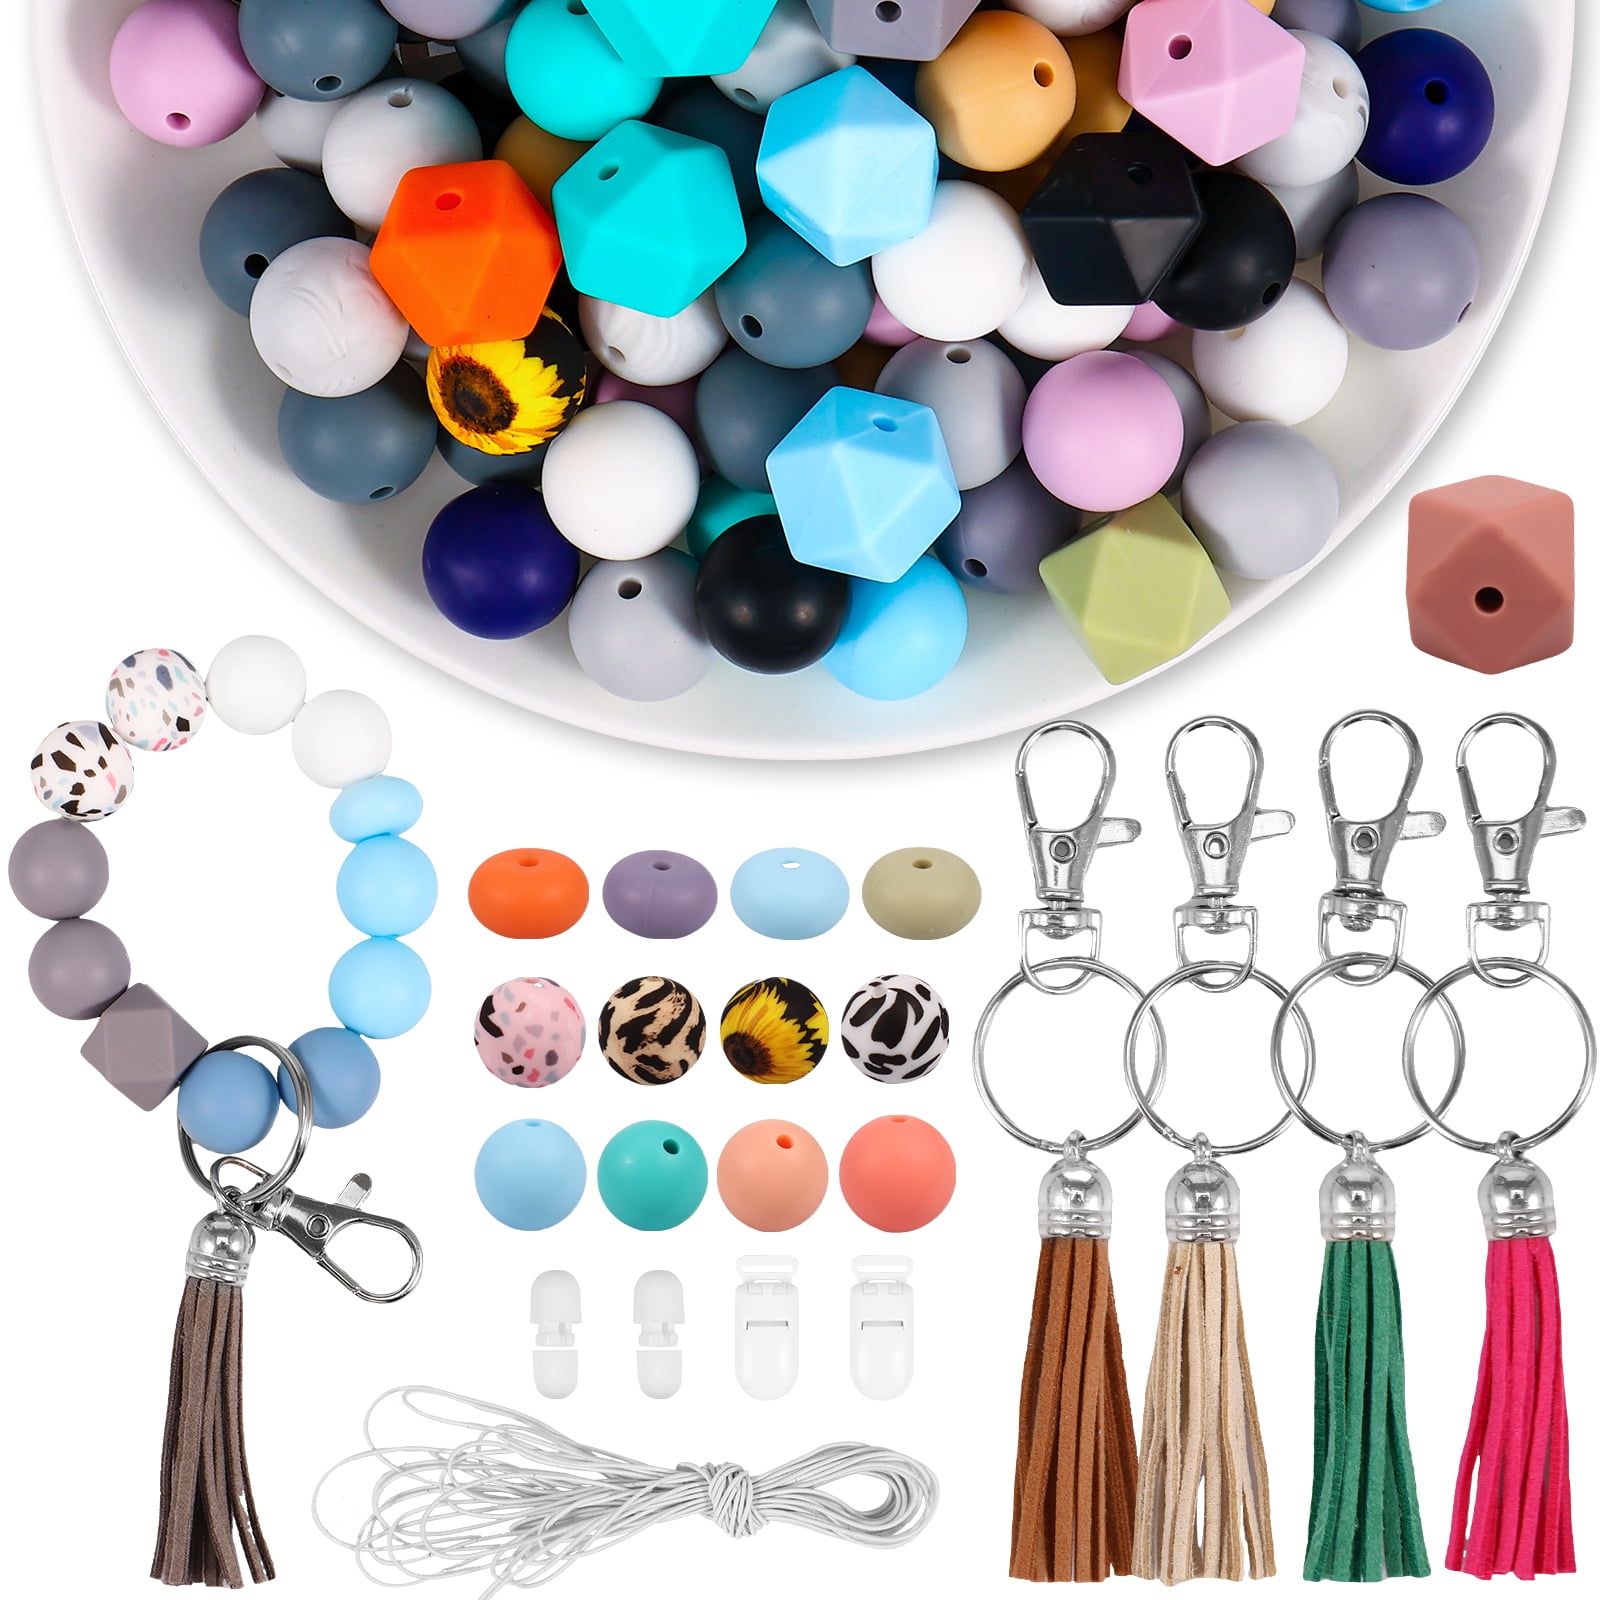 GorgGorho 15mm Silicone Beads Bulk Kit with Tassel for Keychain  Making,Round Assorted Rubber Leopard Beads and Polygonal Loose Bead DIY for  Necklace